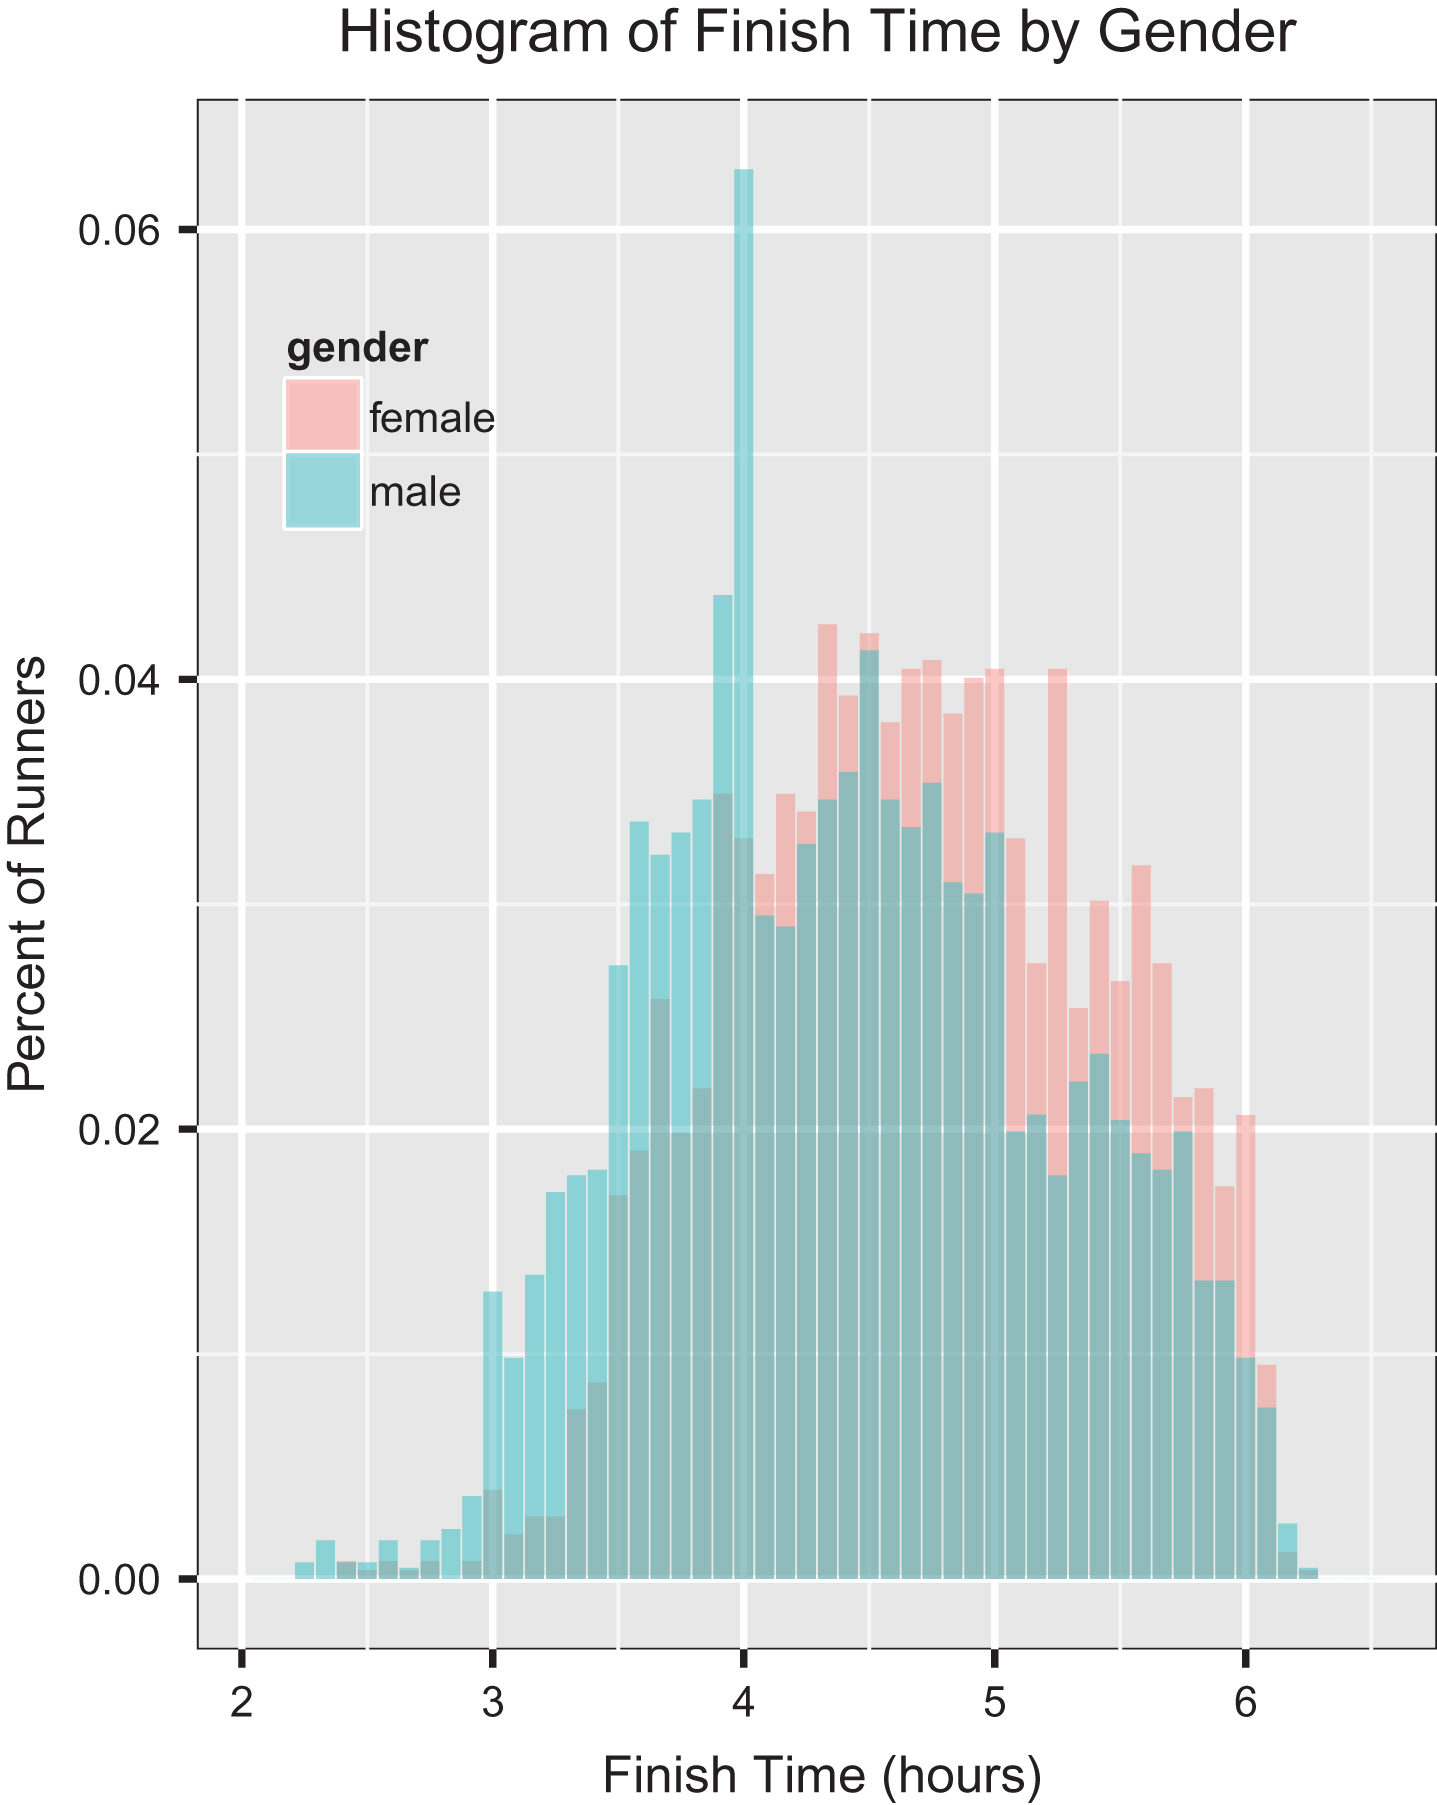 Histogram of finish times normalized by gender.